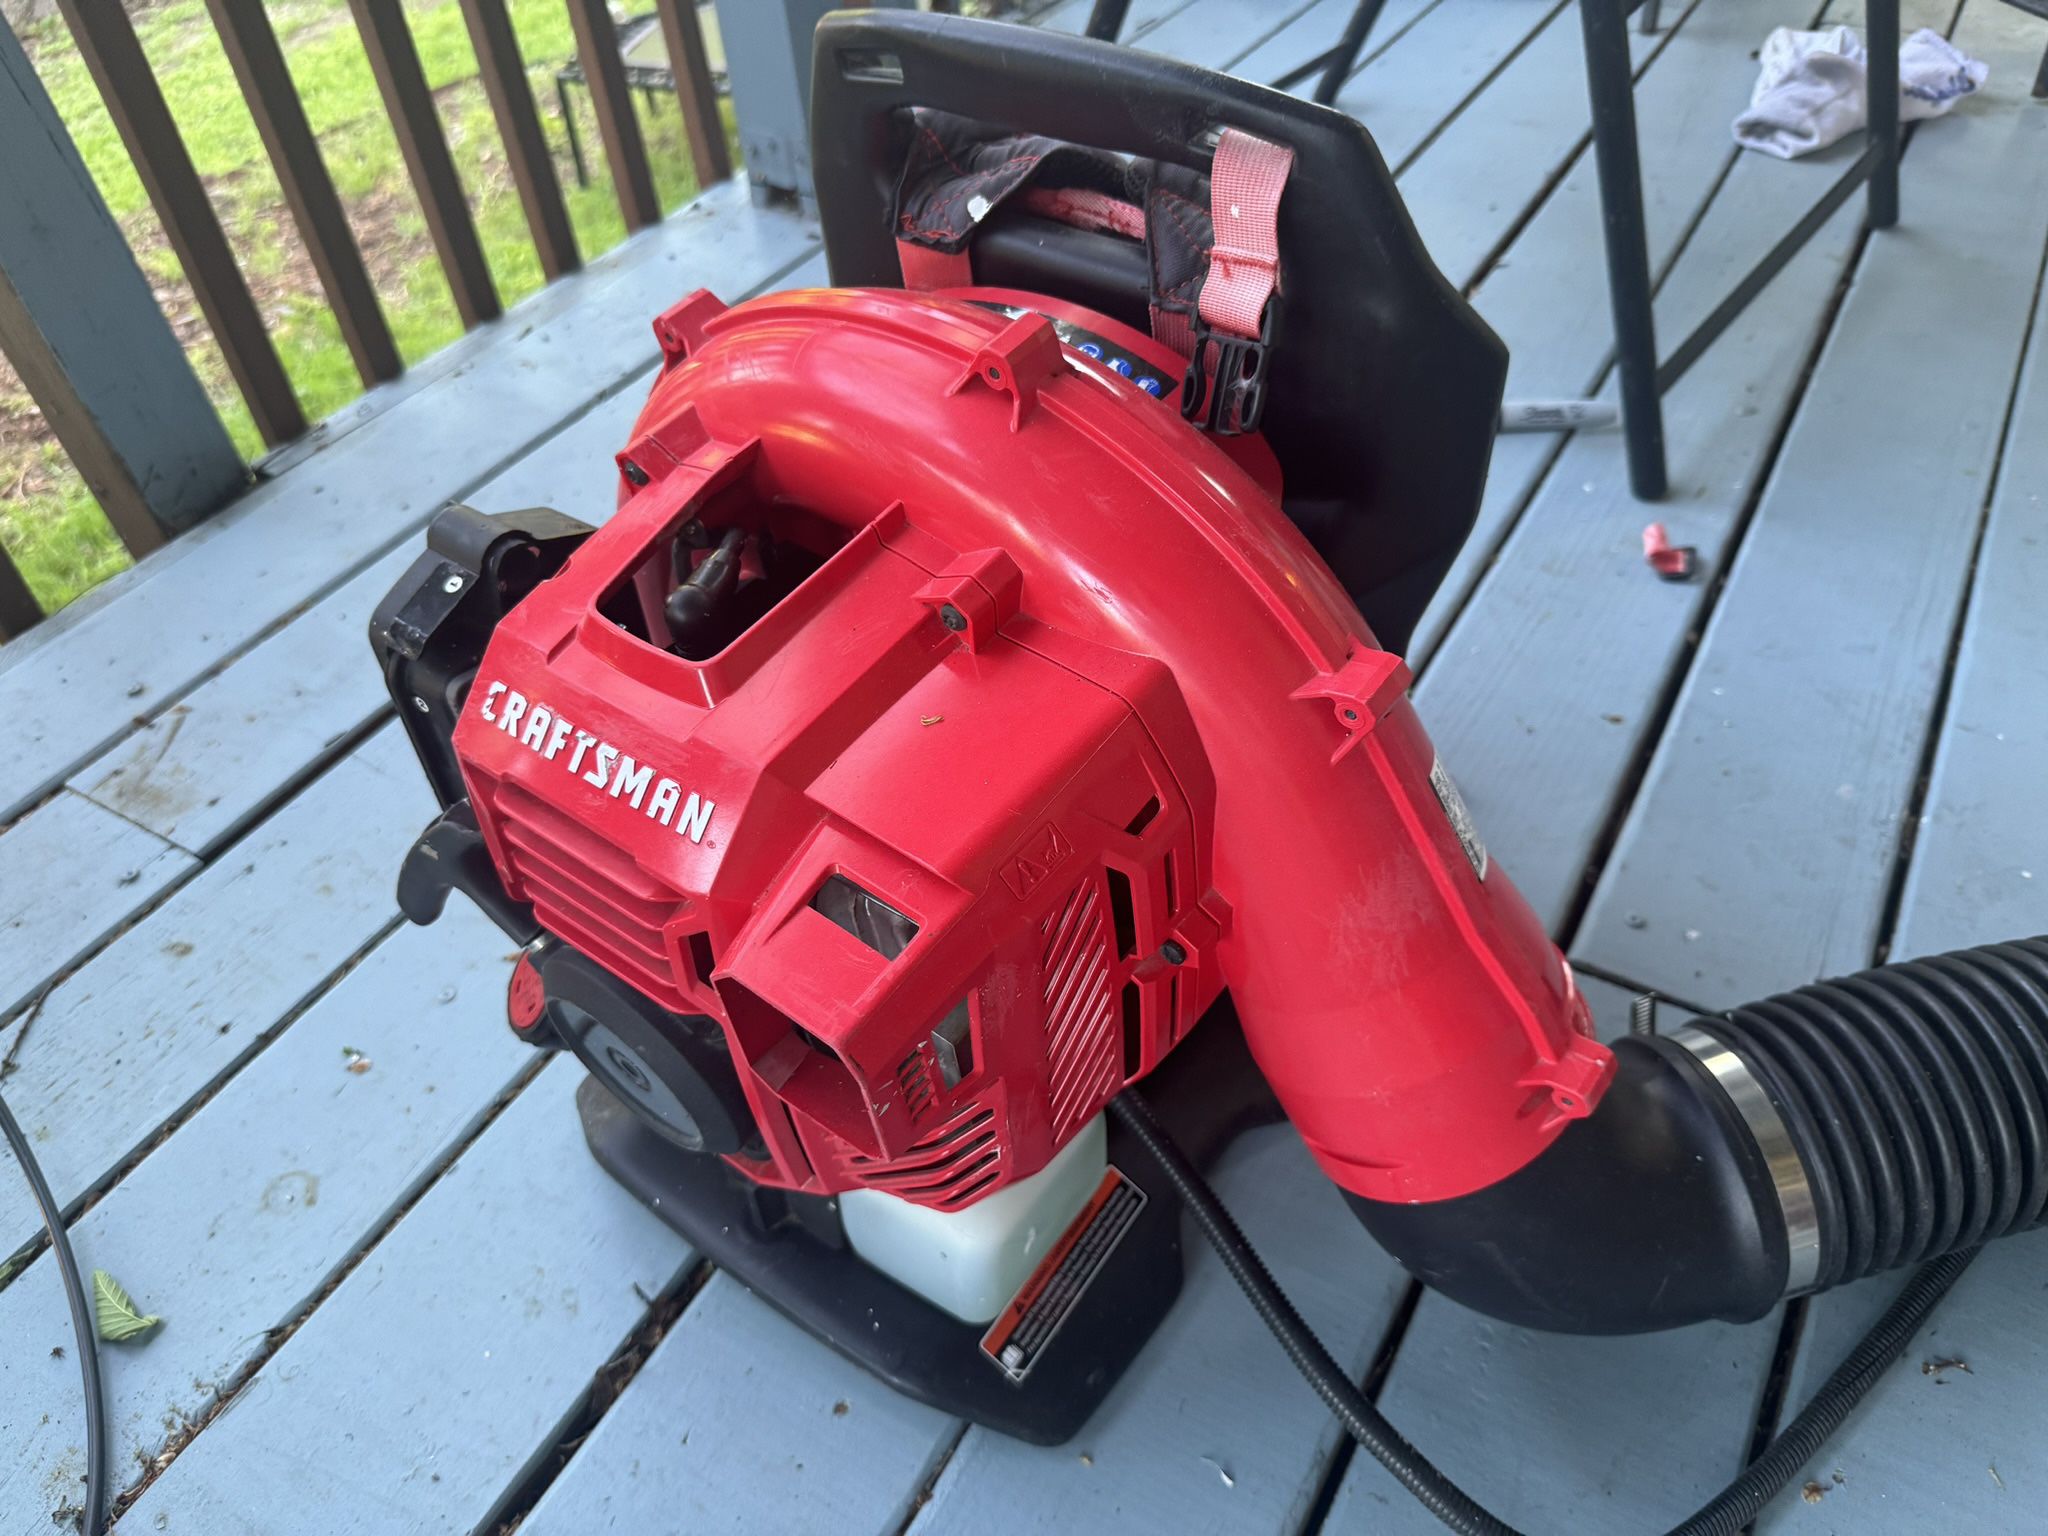 Craftsman gas powered leave blower/backpack